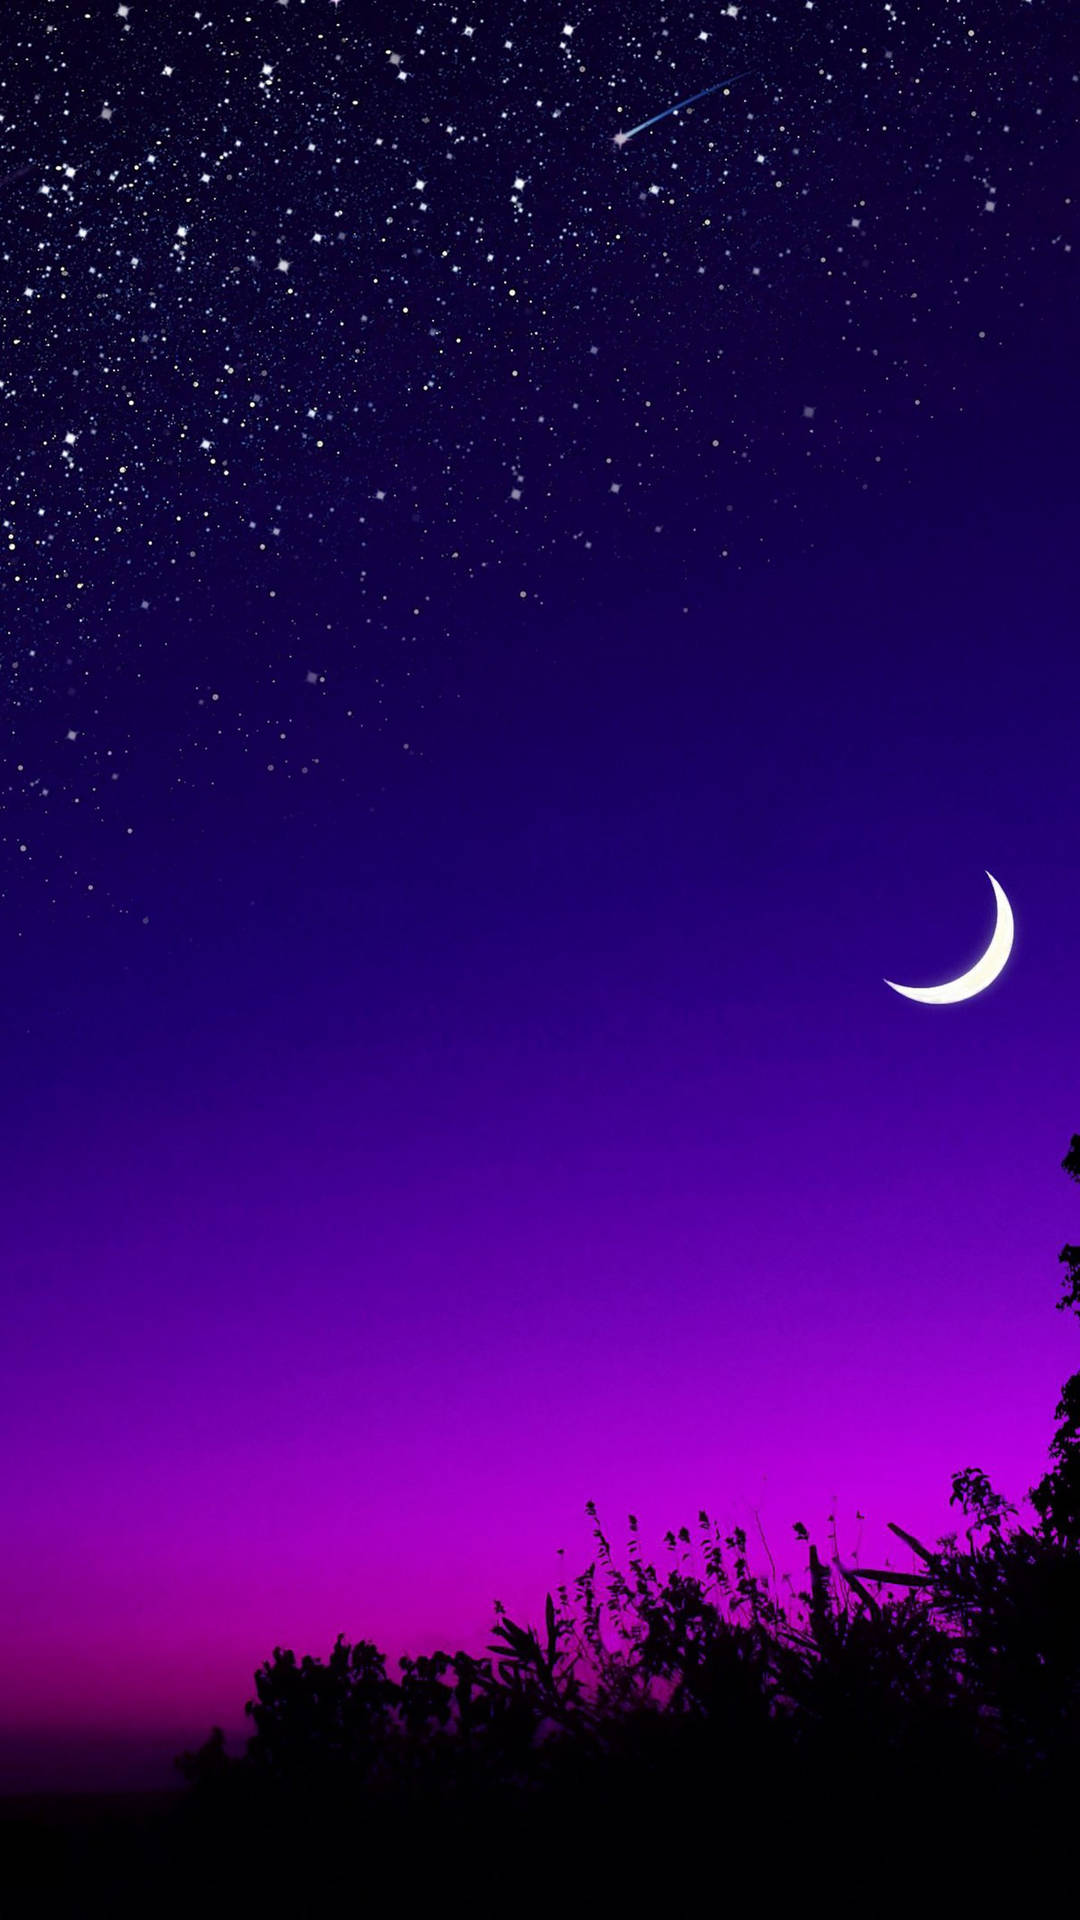 Moon And Stars Periwinkle Sky